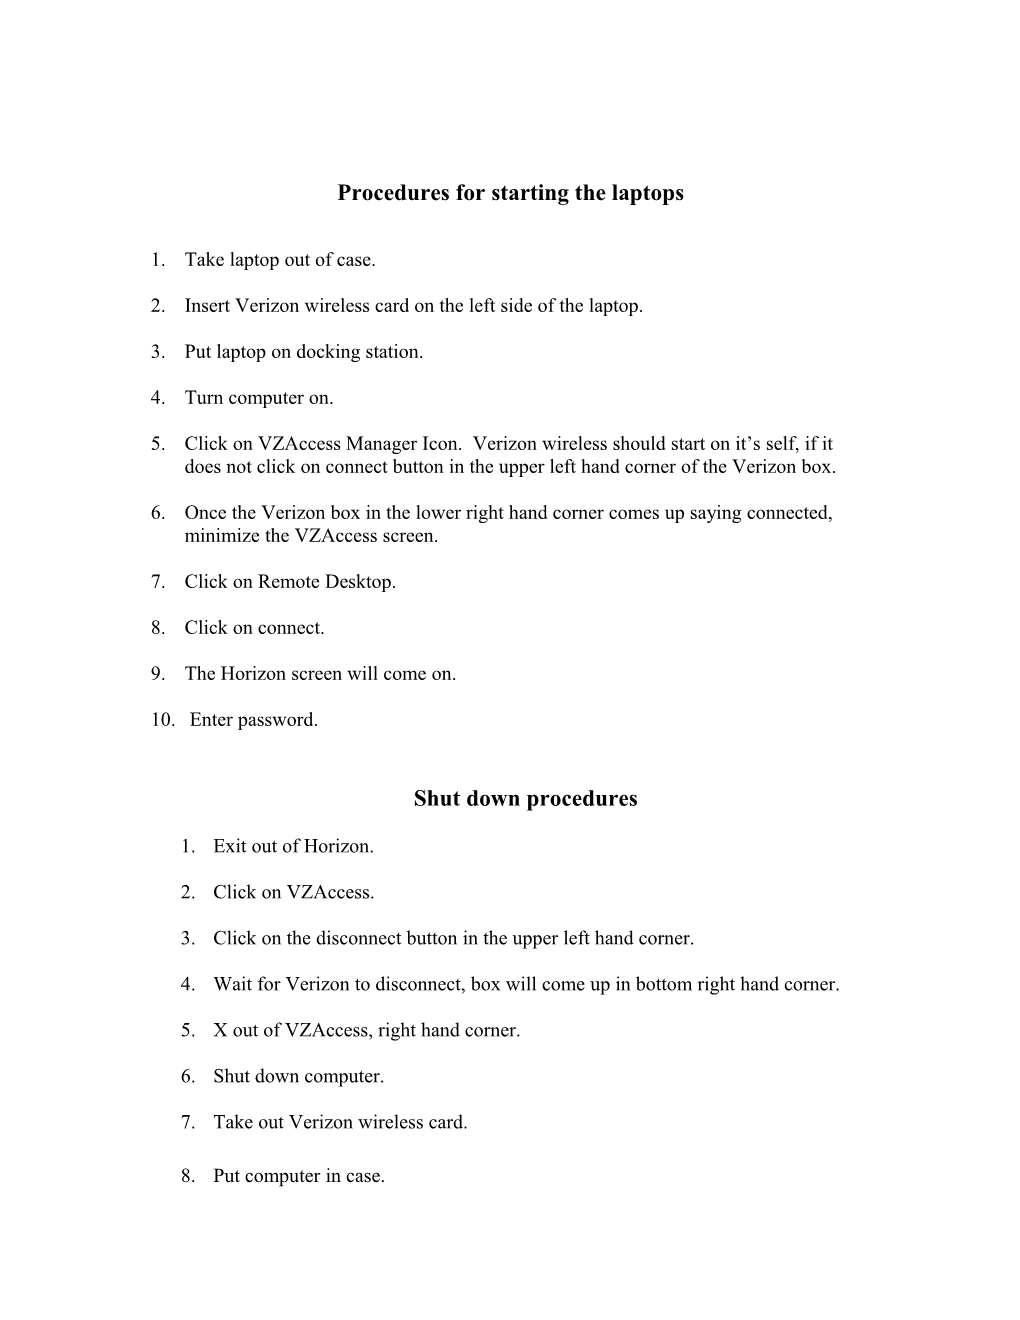 Procedures for Starting the Laptops